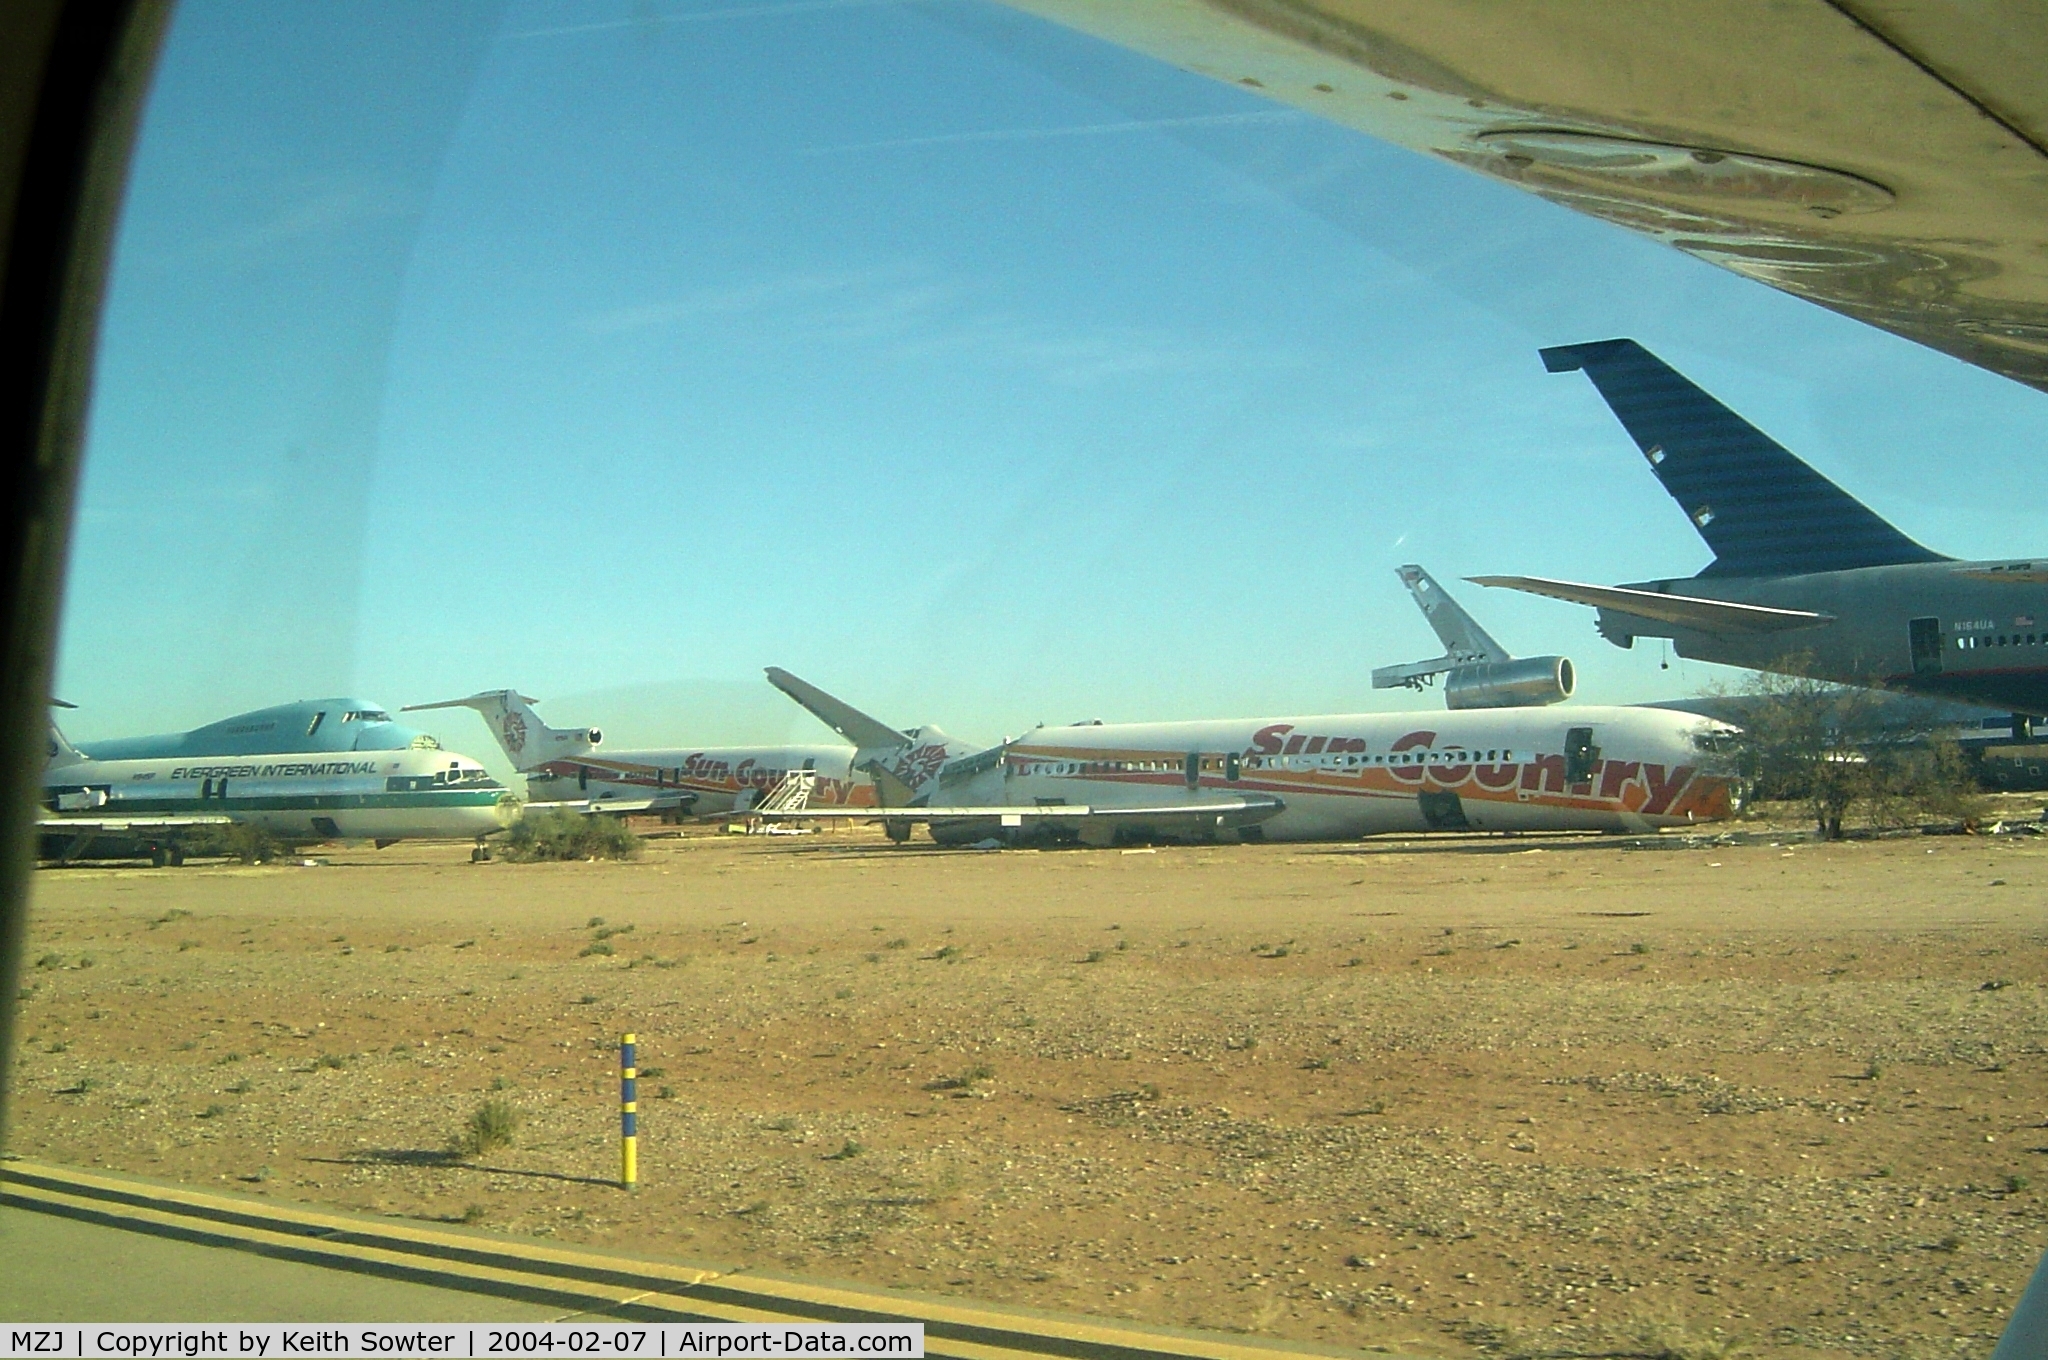 Pinal Airpark Airport (MZJ) - Taken through aircraft window whilst taxying past